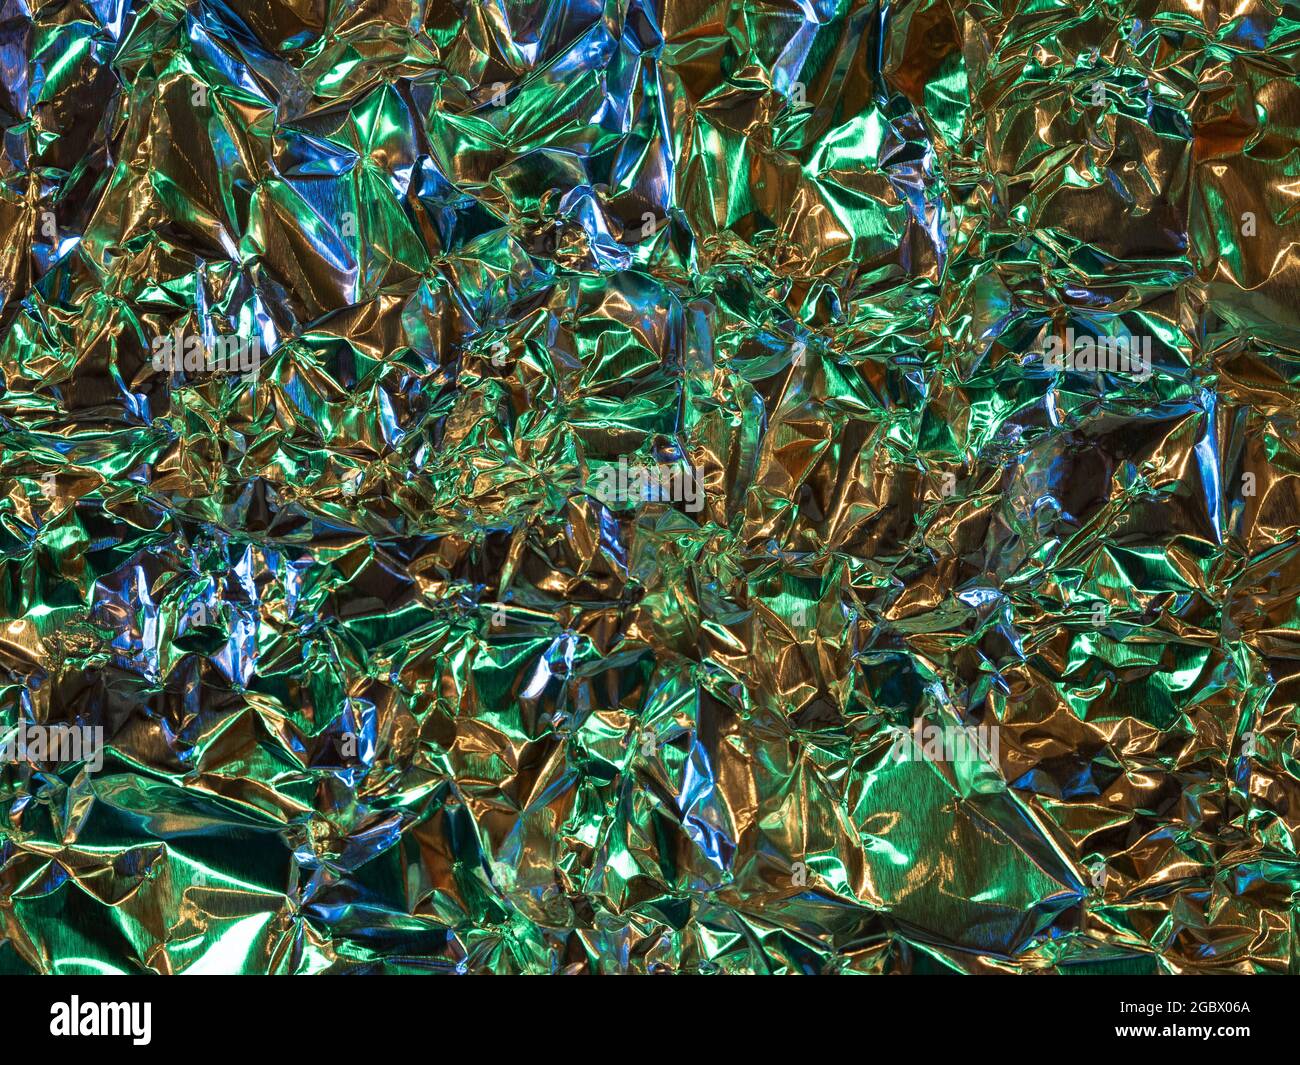 Closeup of abstract colorful crinkly shiny material Stock Photo